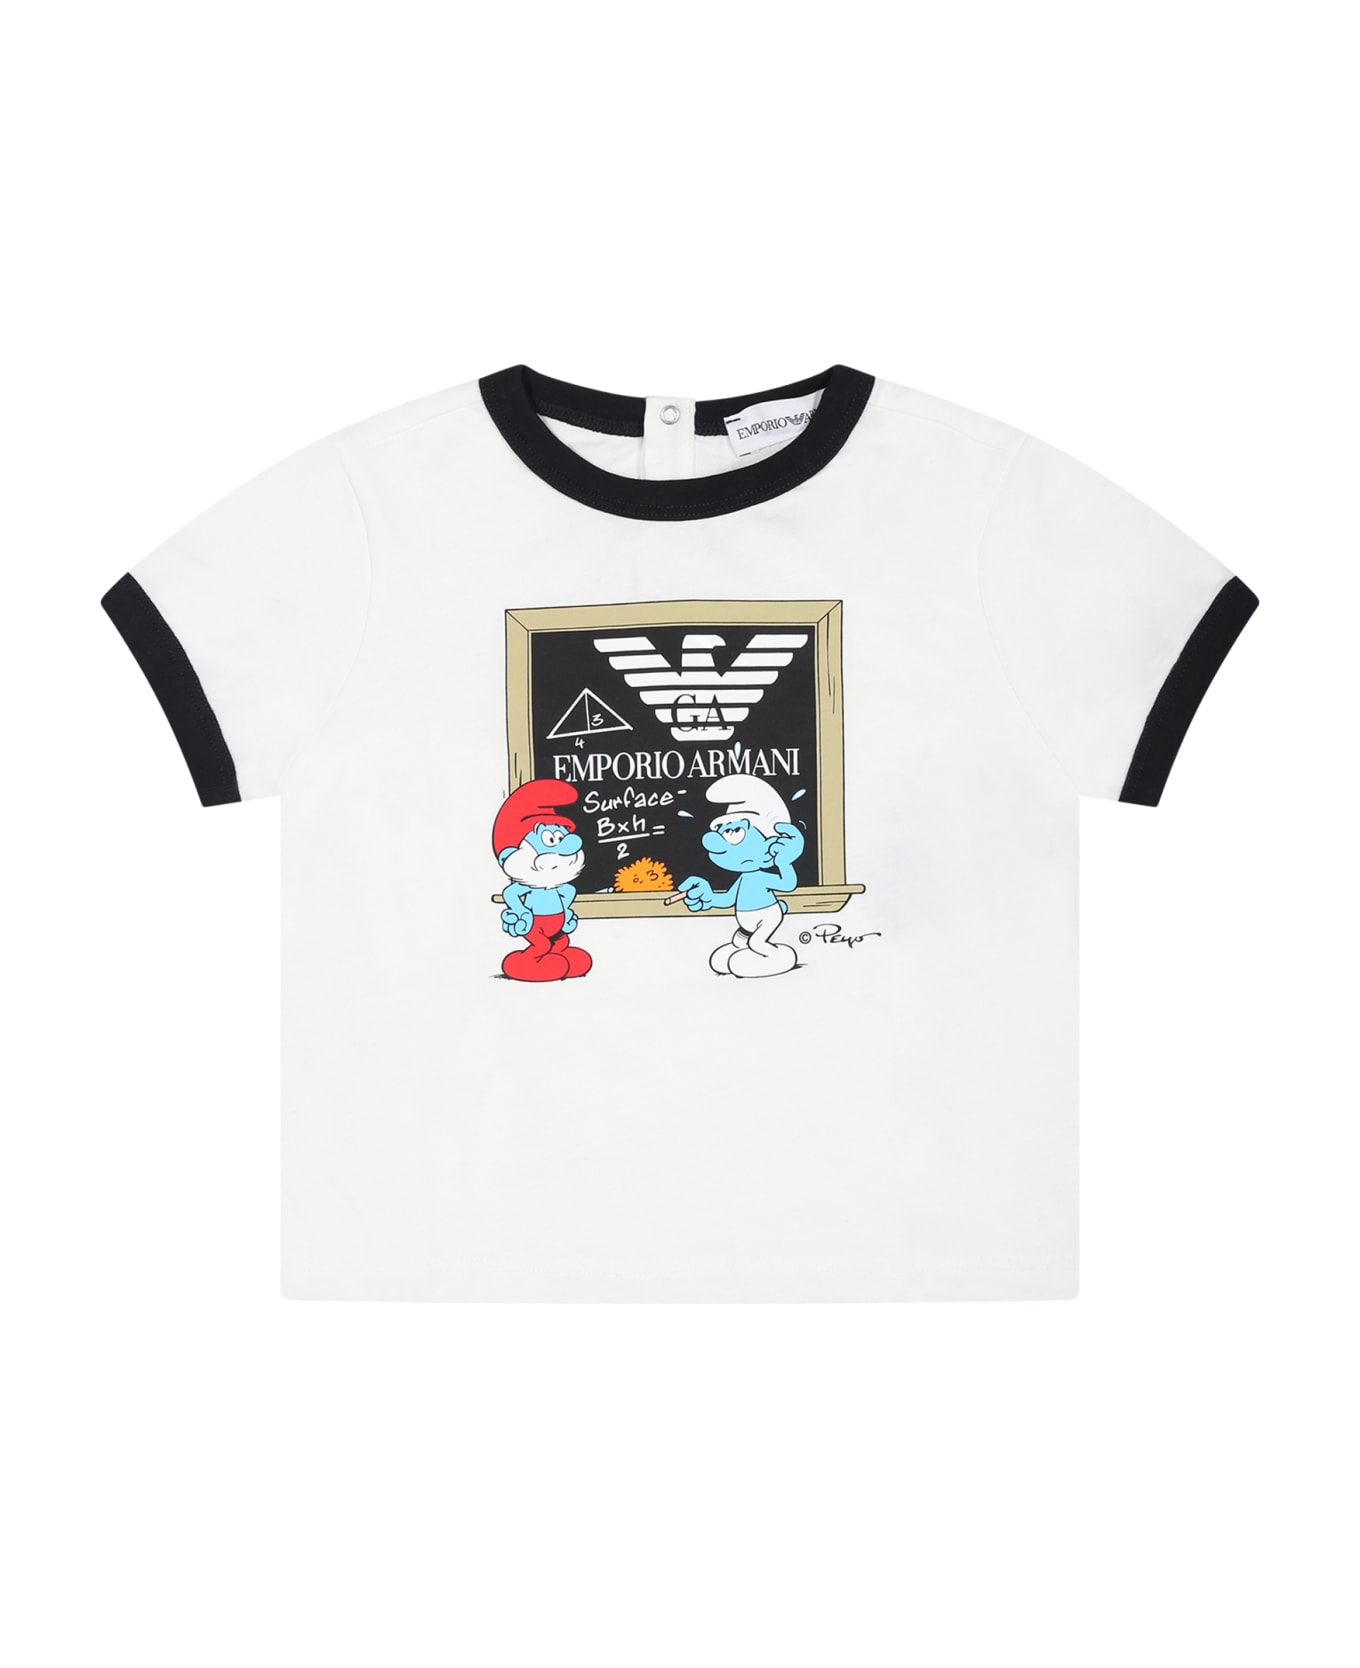 Emporio Armani White T-shirt For Baby Boy With Eaglet And Smurfs - White